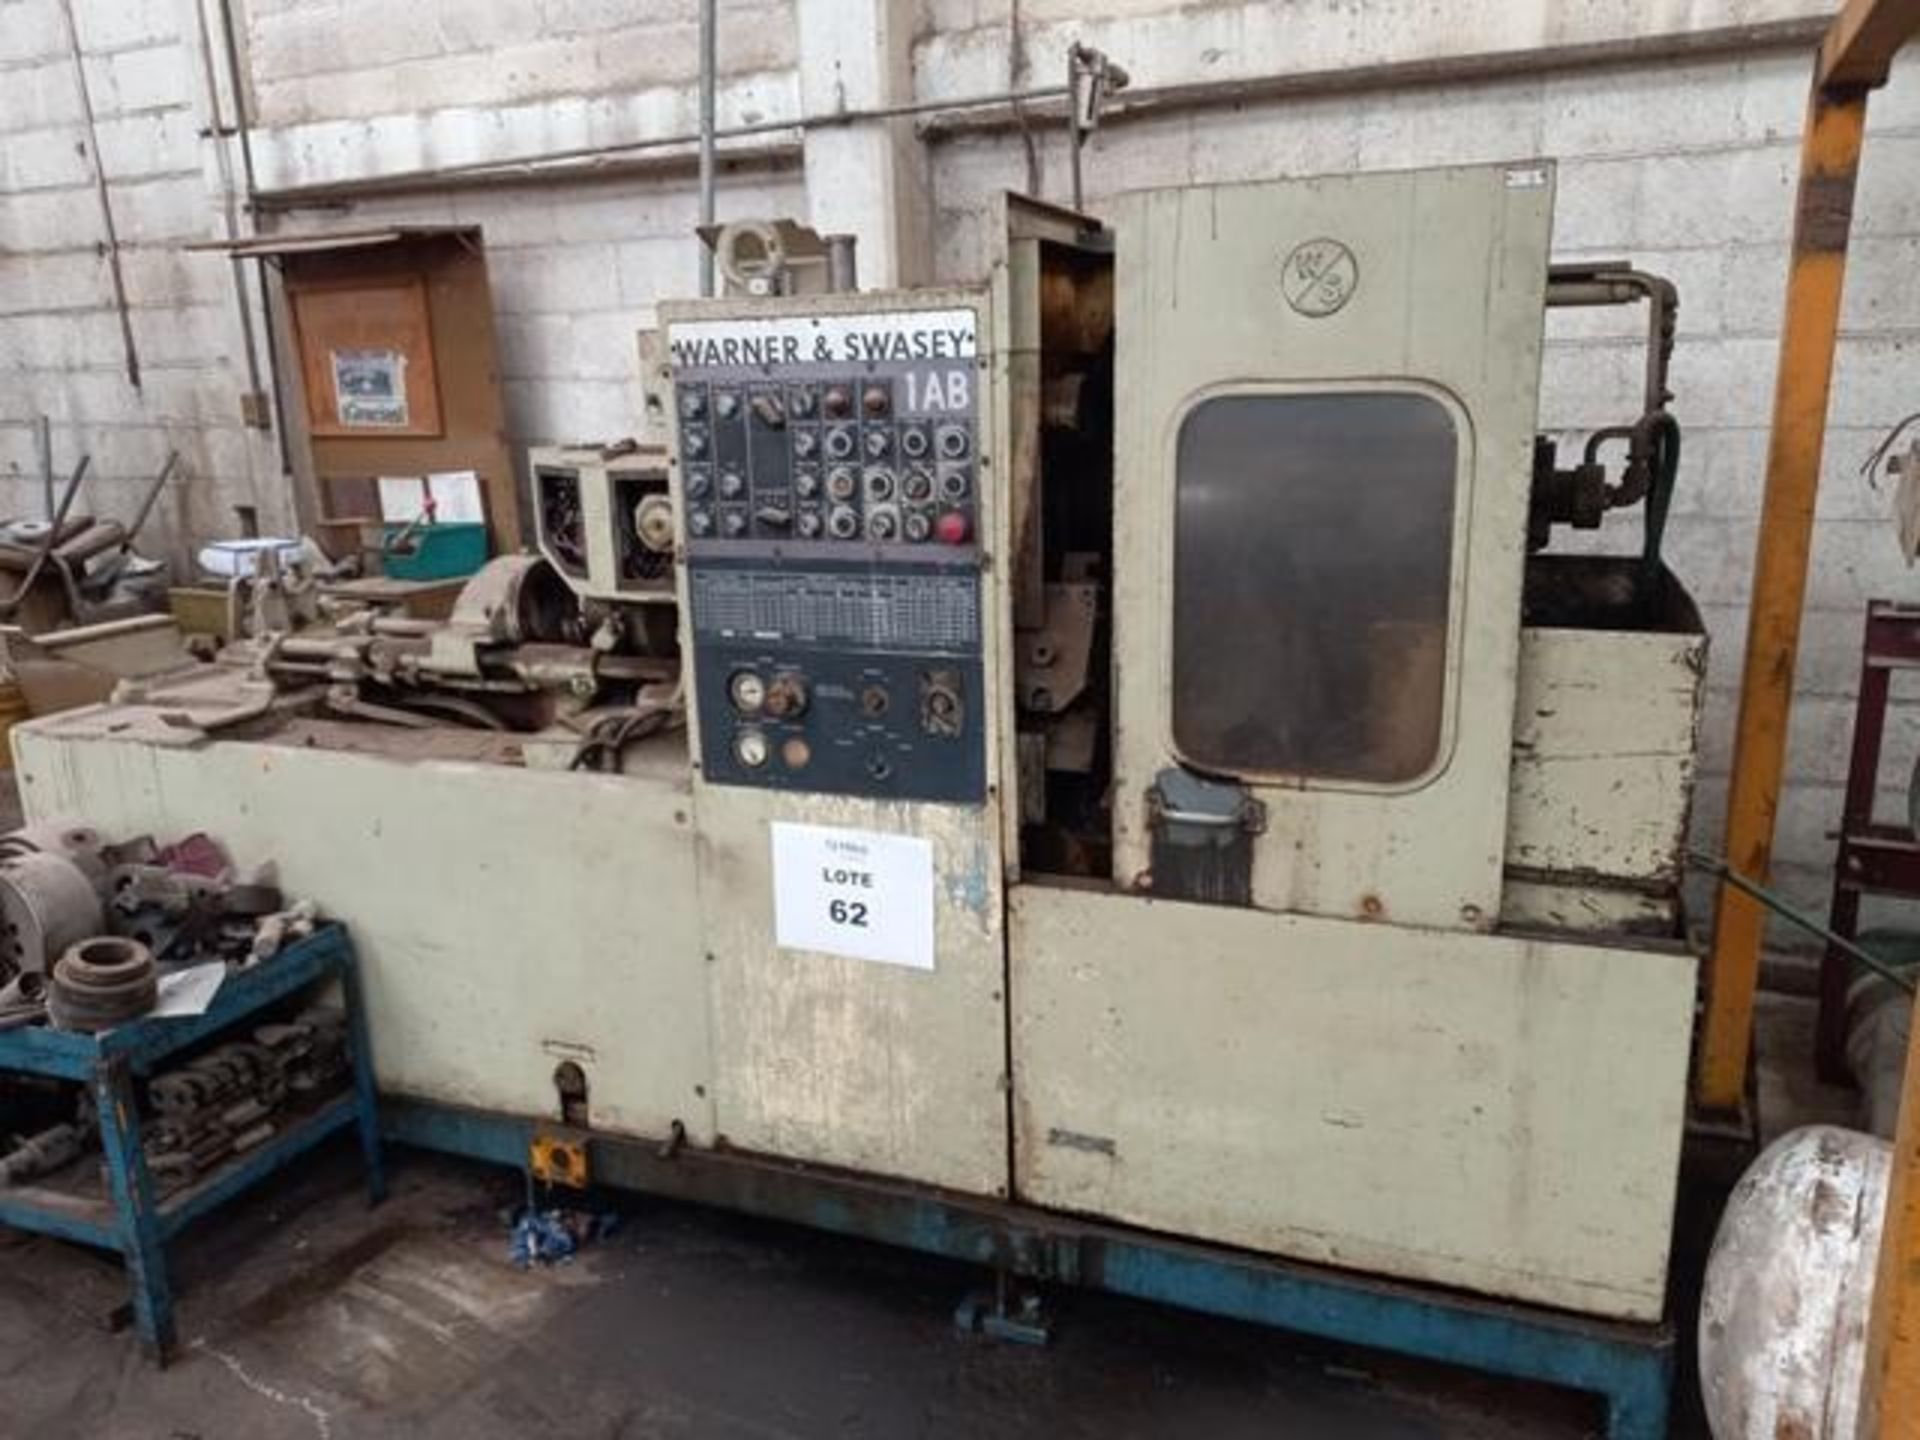 The Warner & Swasey Co 1AB M-3880 Chucker Lathe, S/N: 2232462: Spindle Speeds: 72 to 2026 Rpm,